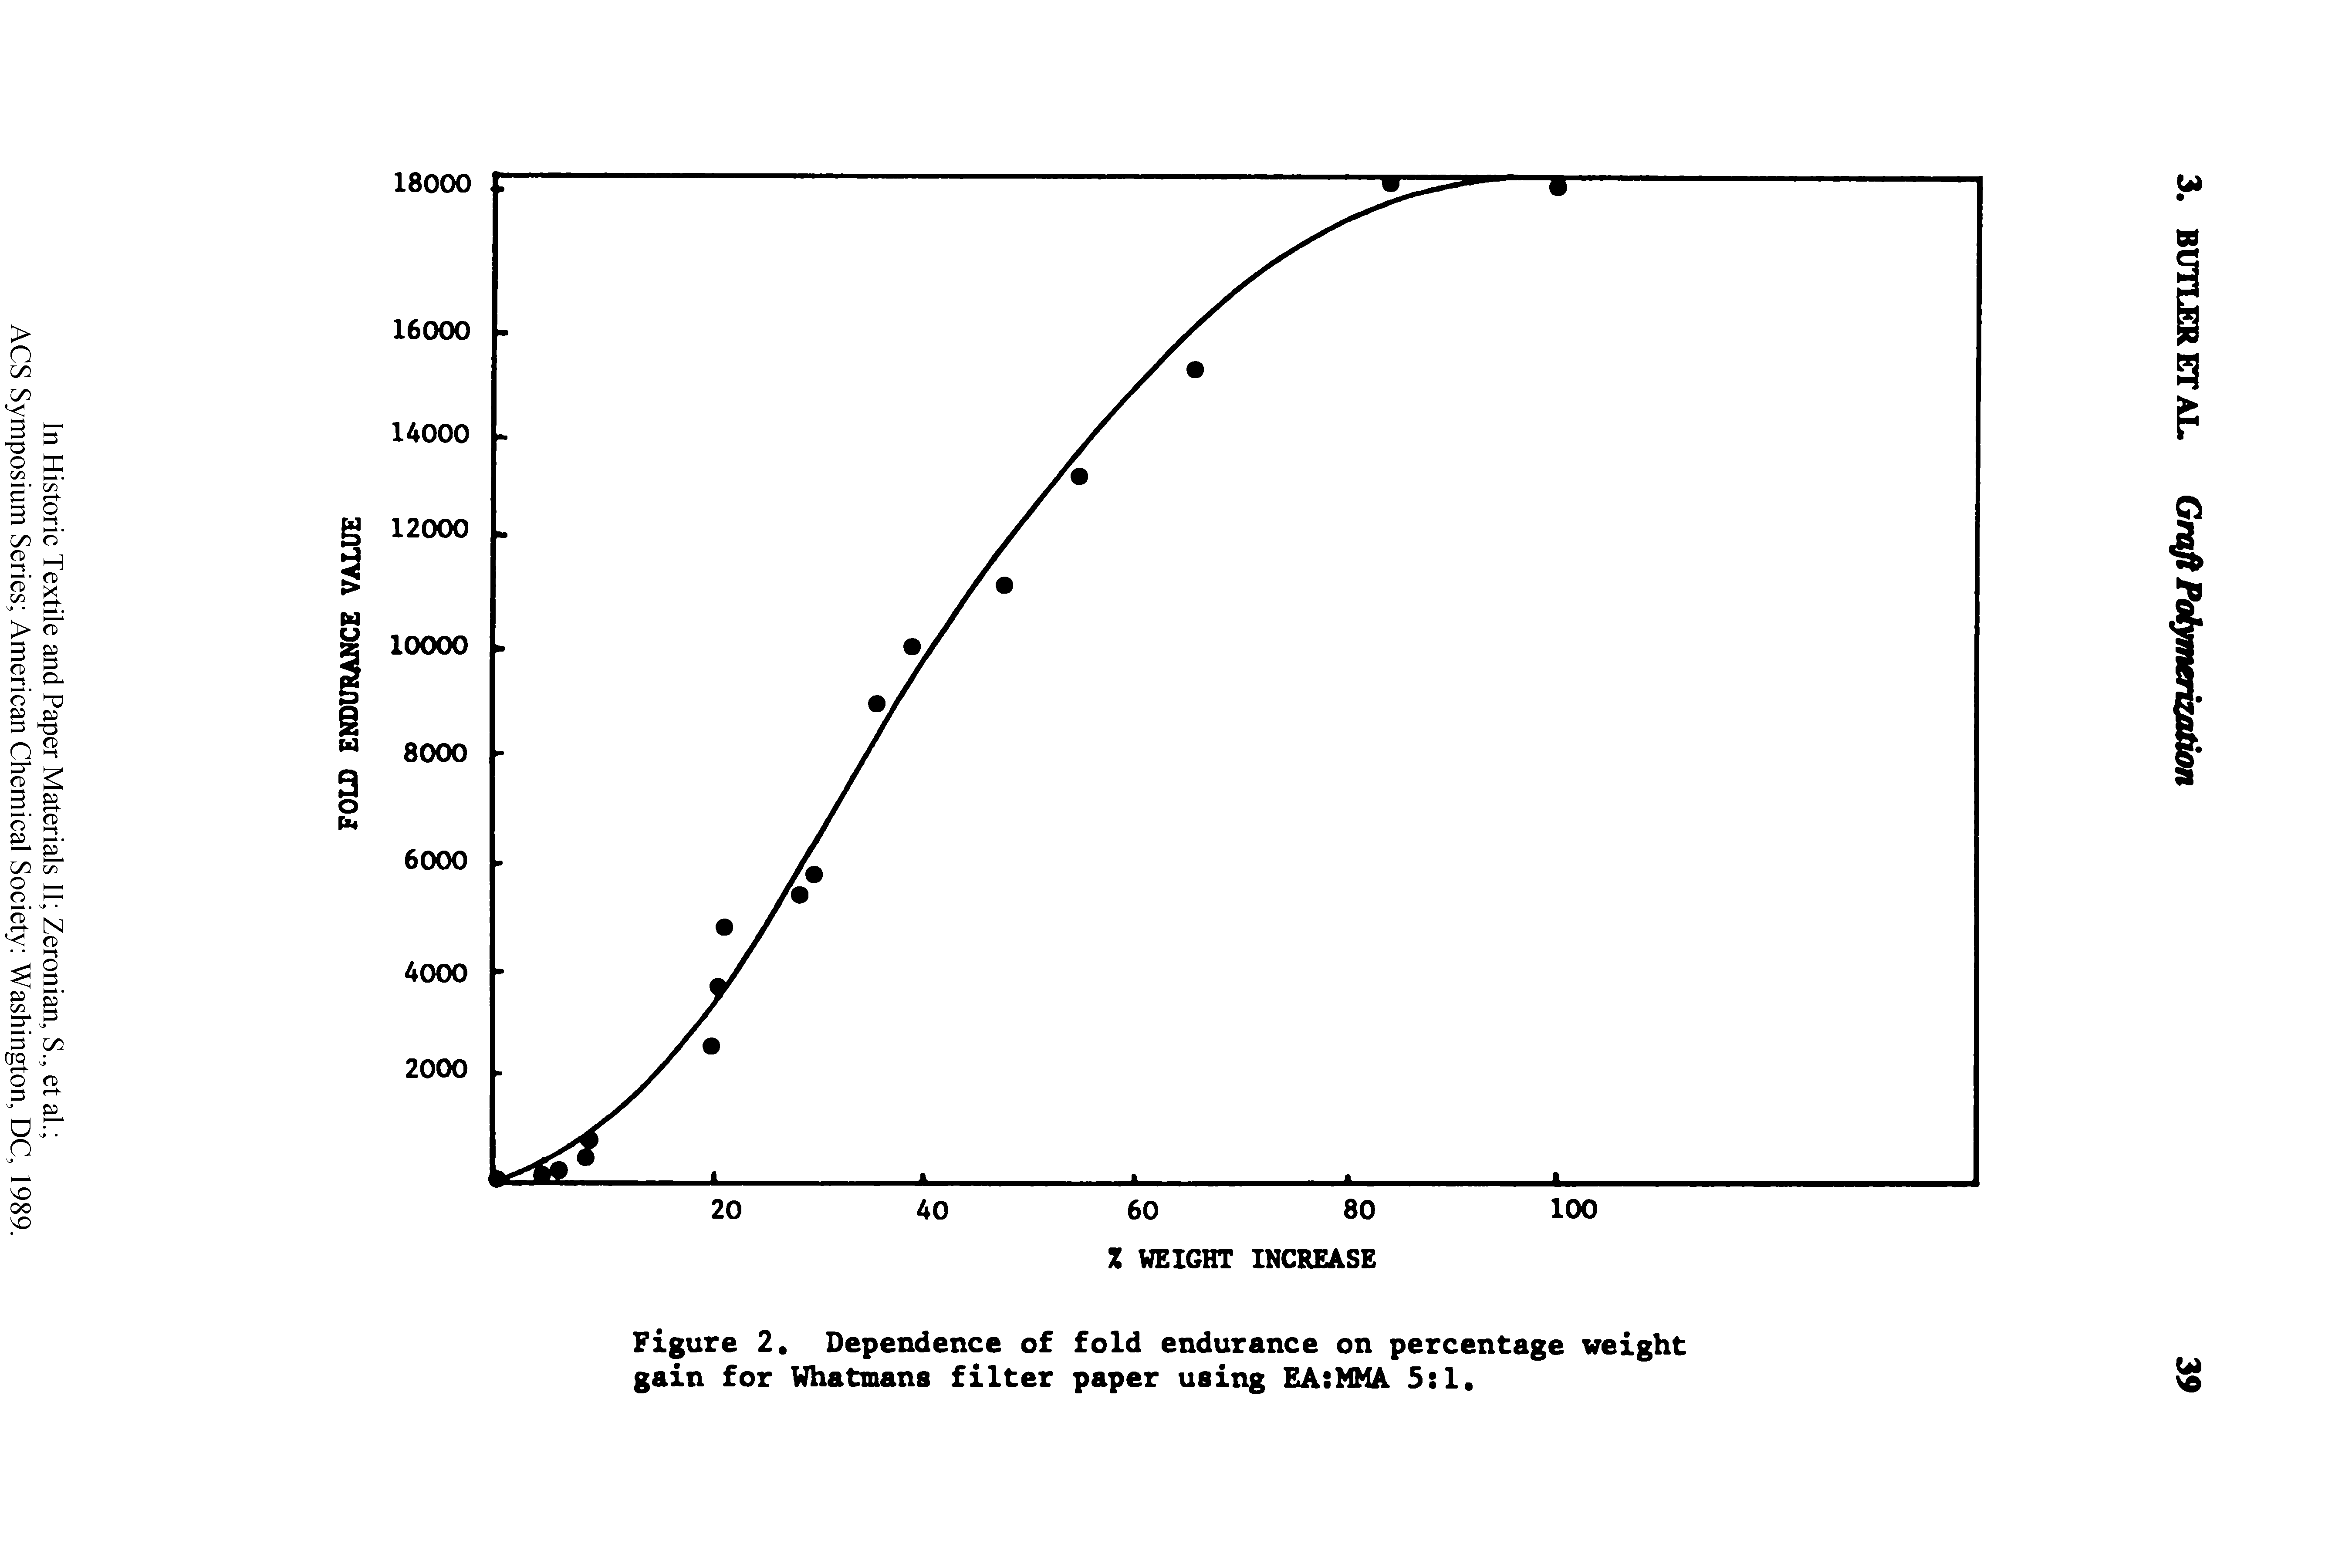 Figure 2. Dependence of fold endurance on percentage weight gain for Whatmans filter paper using EA MMA 5 1.